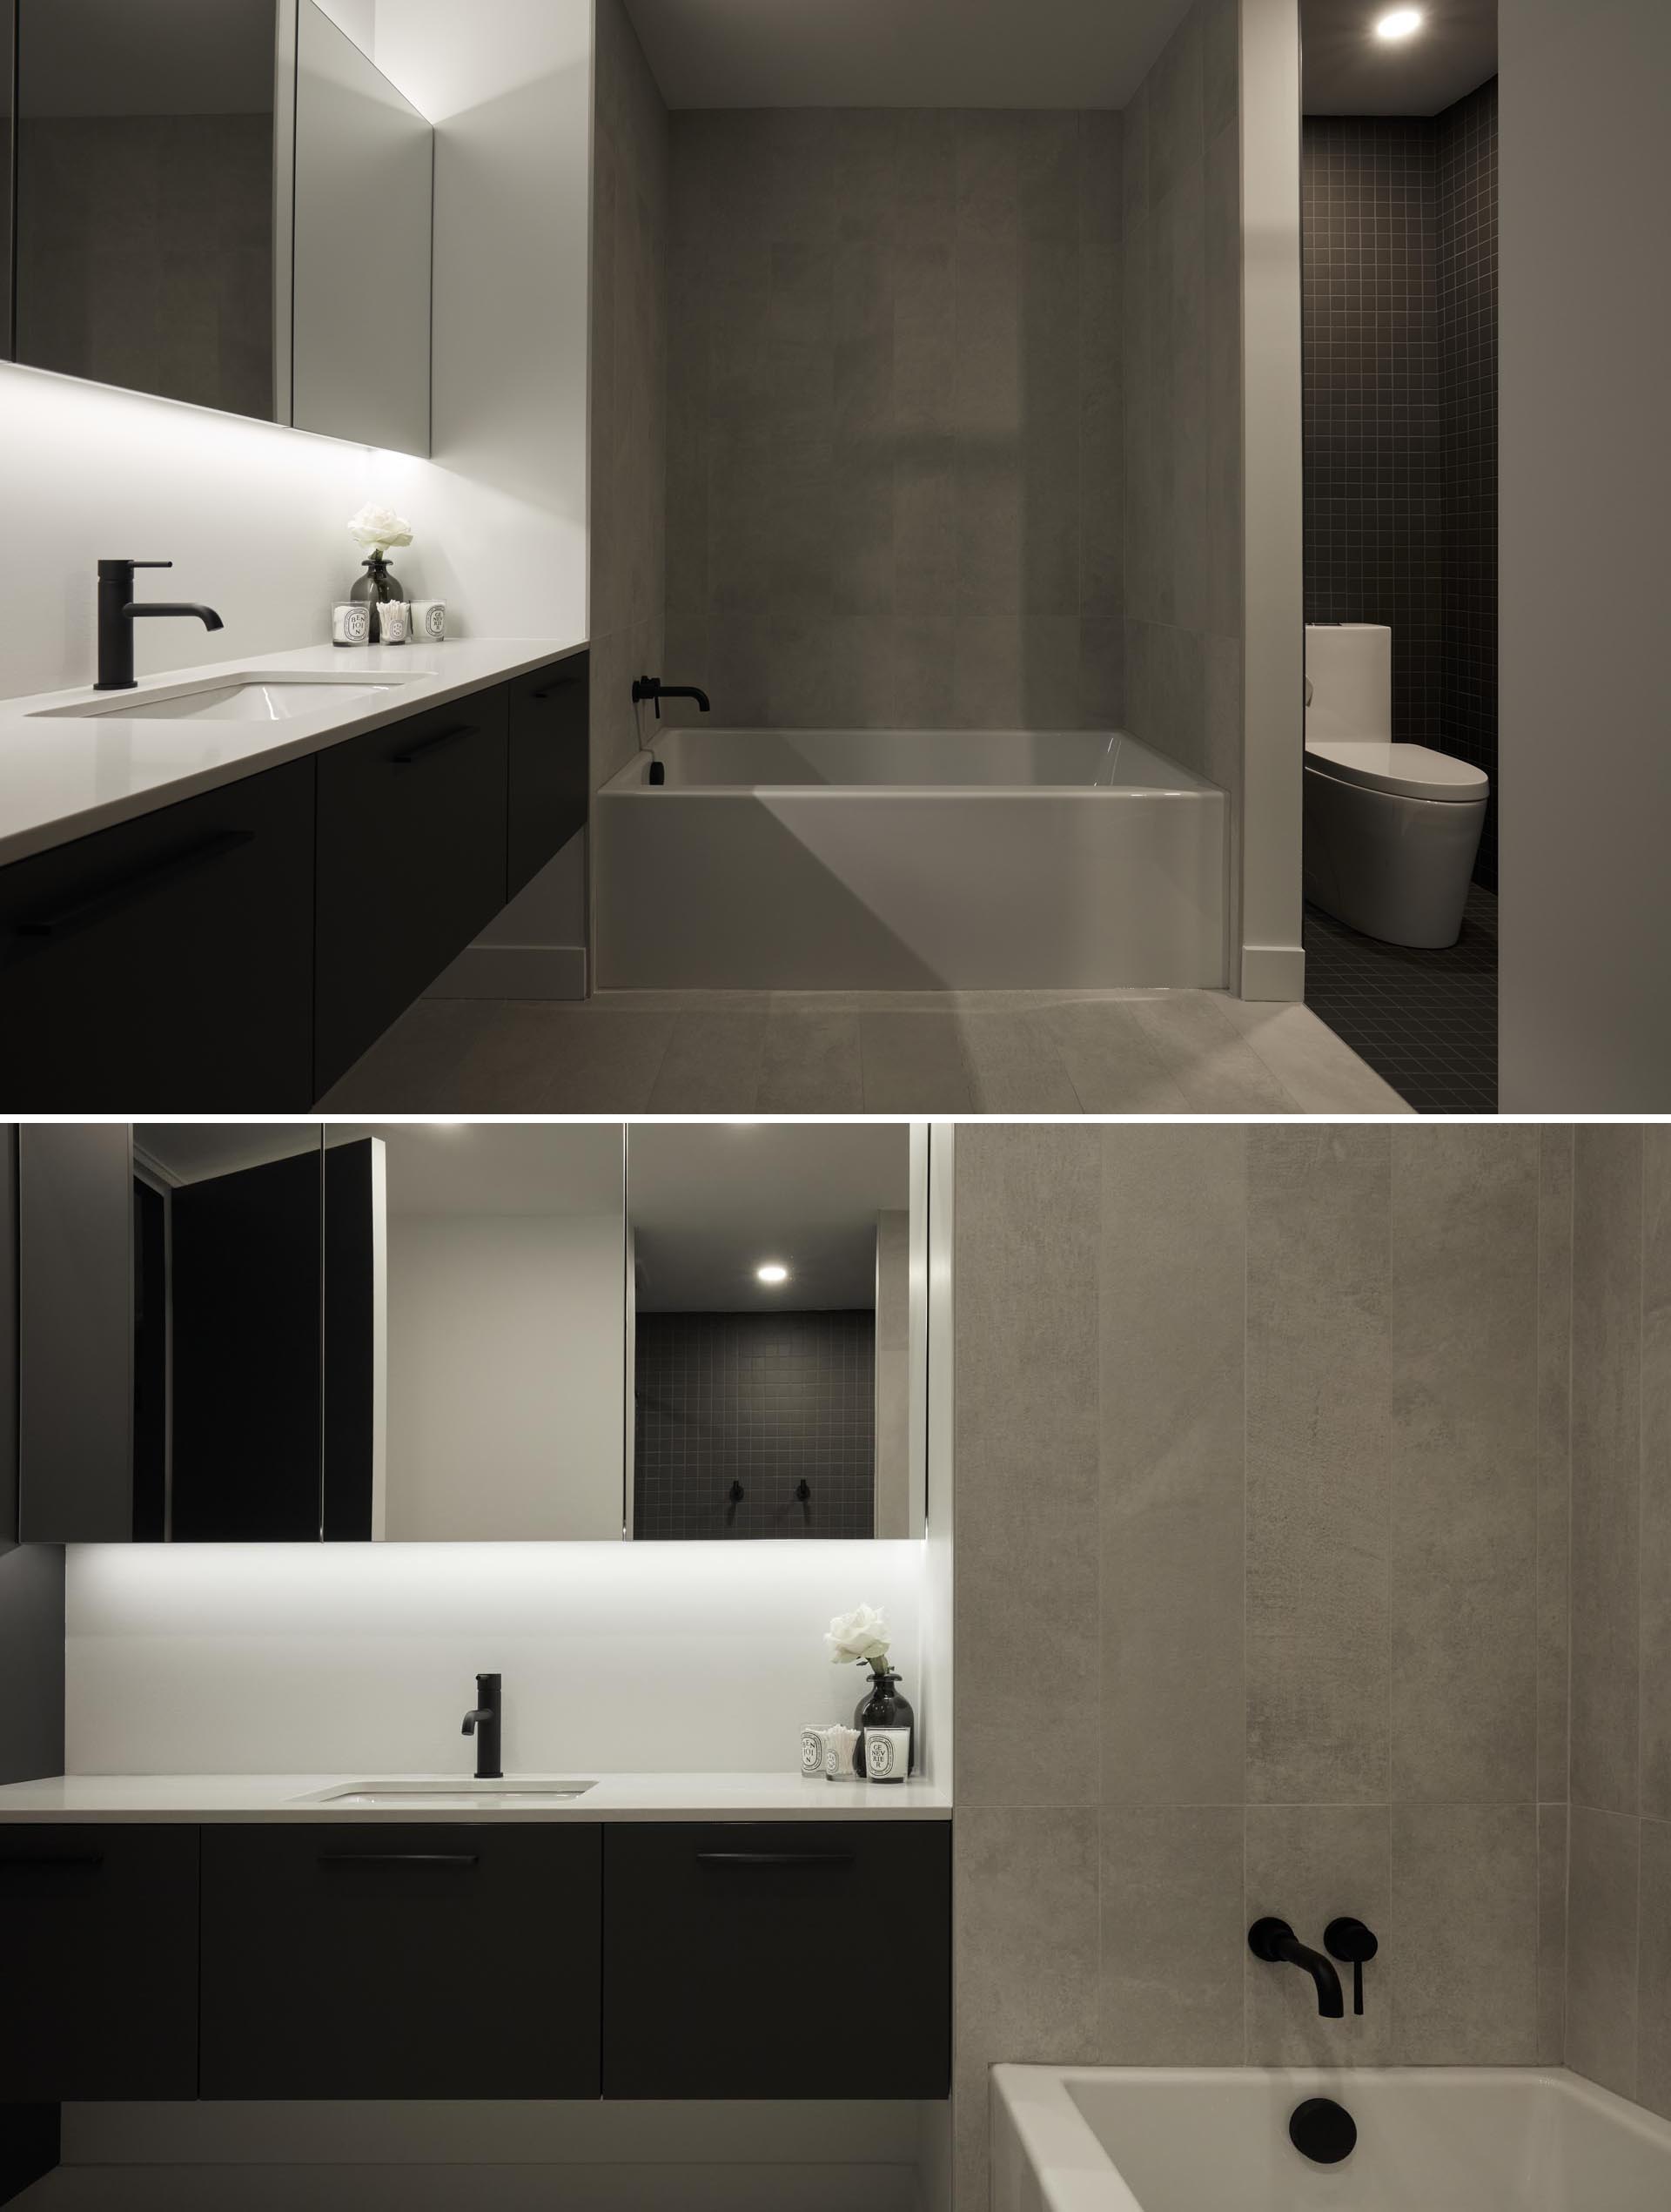 The design of this modern bathroom has been separated into zones. The light zone combines the vanity, the medicine cabinet, and the bath, while the dark zone combines the toilet and a shower with built-in shelving niche.